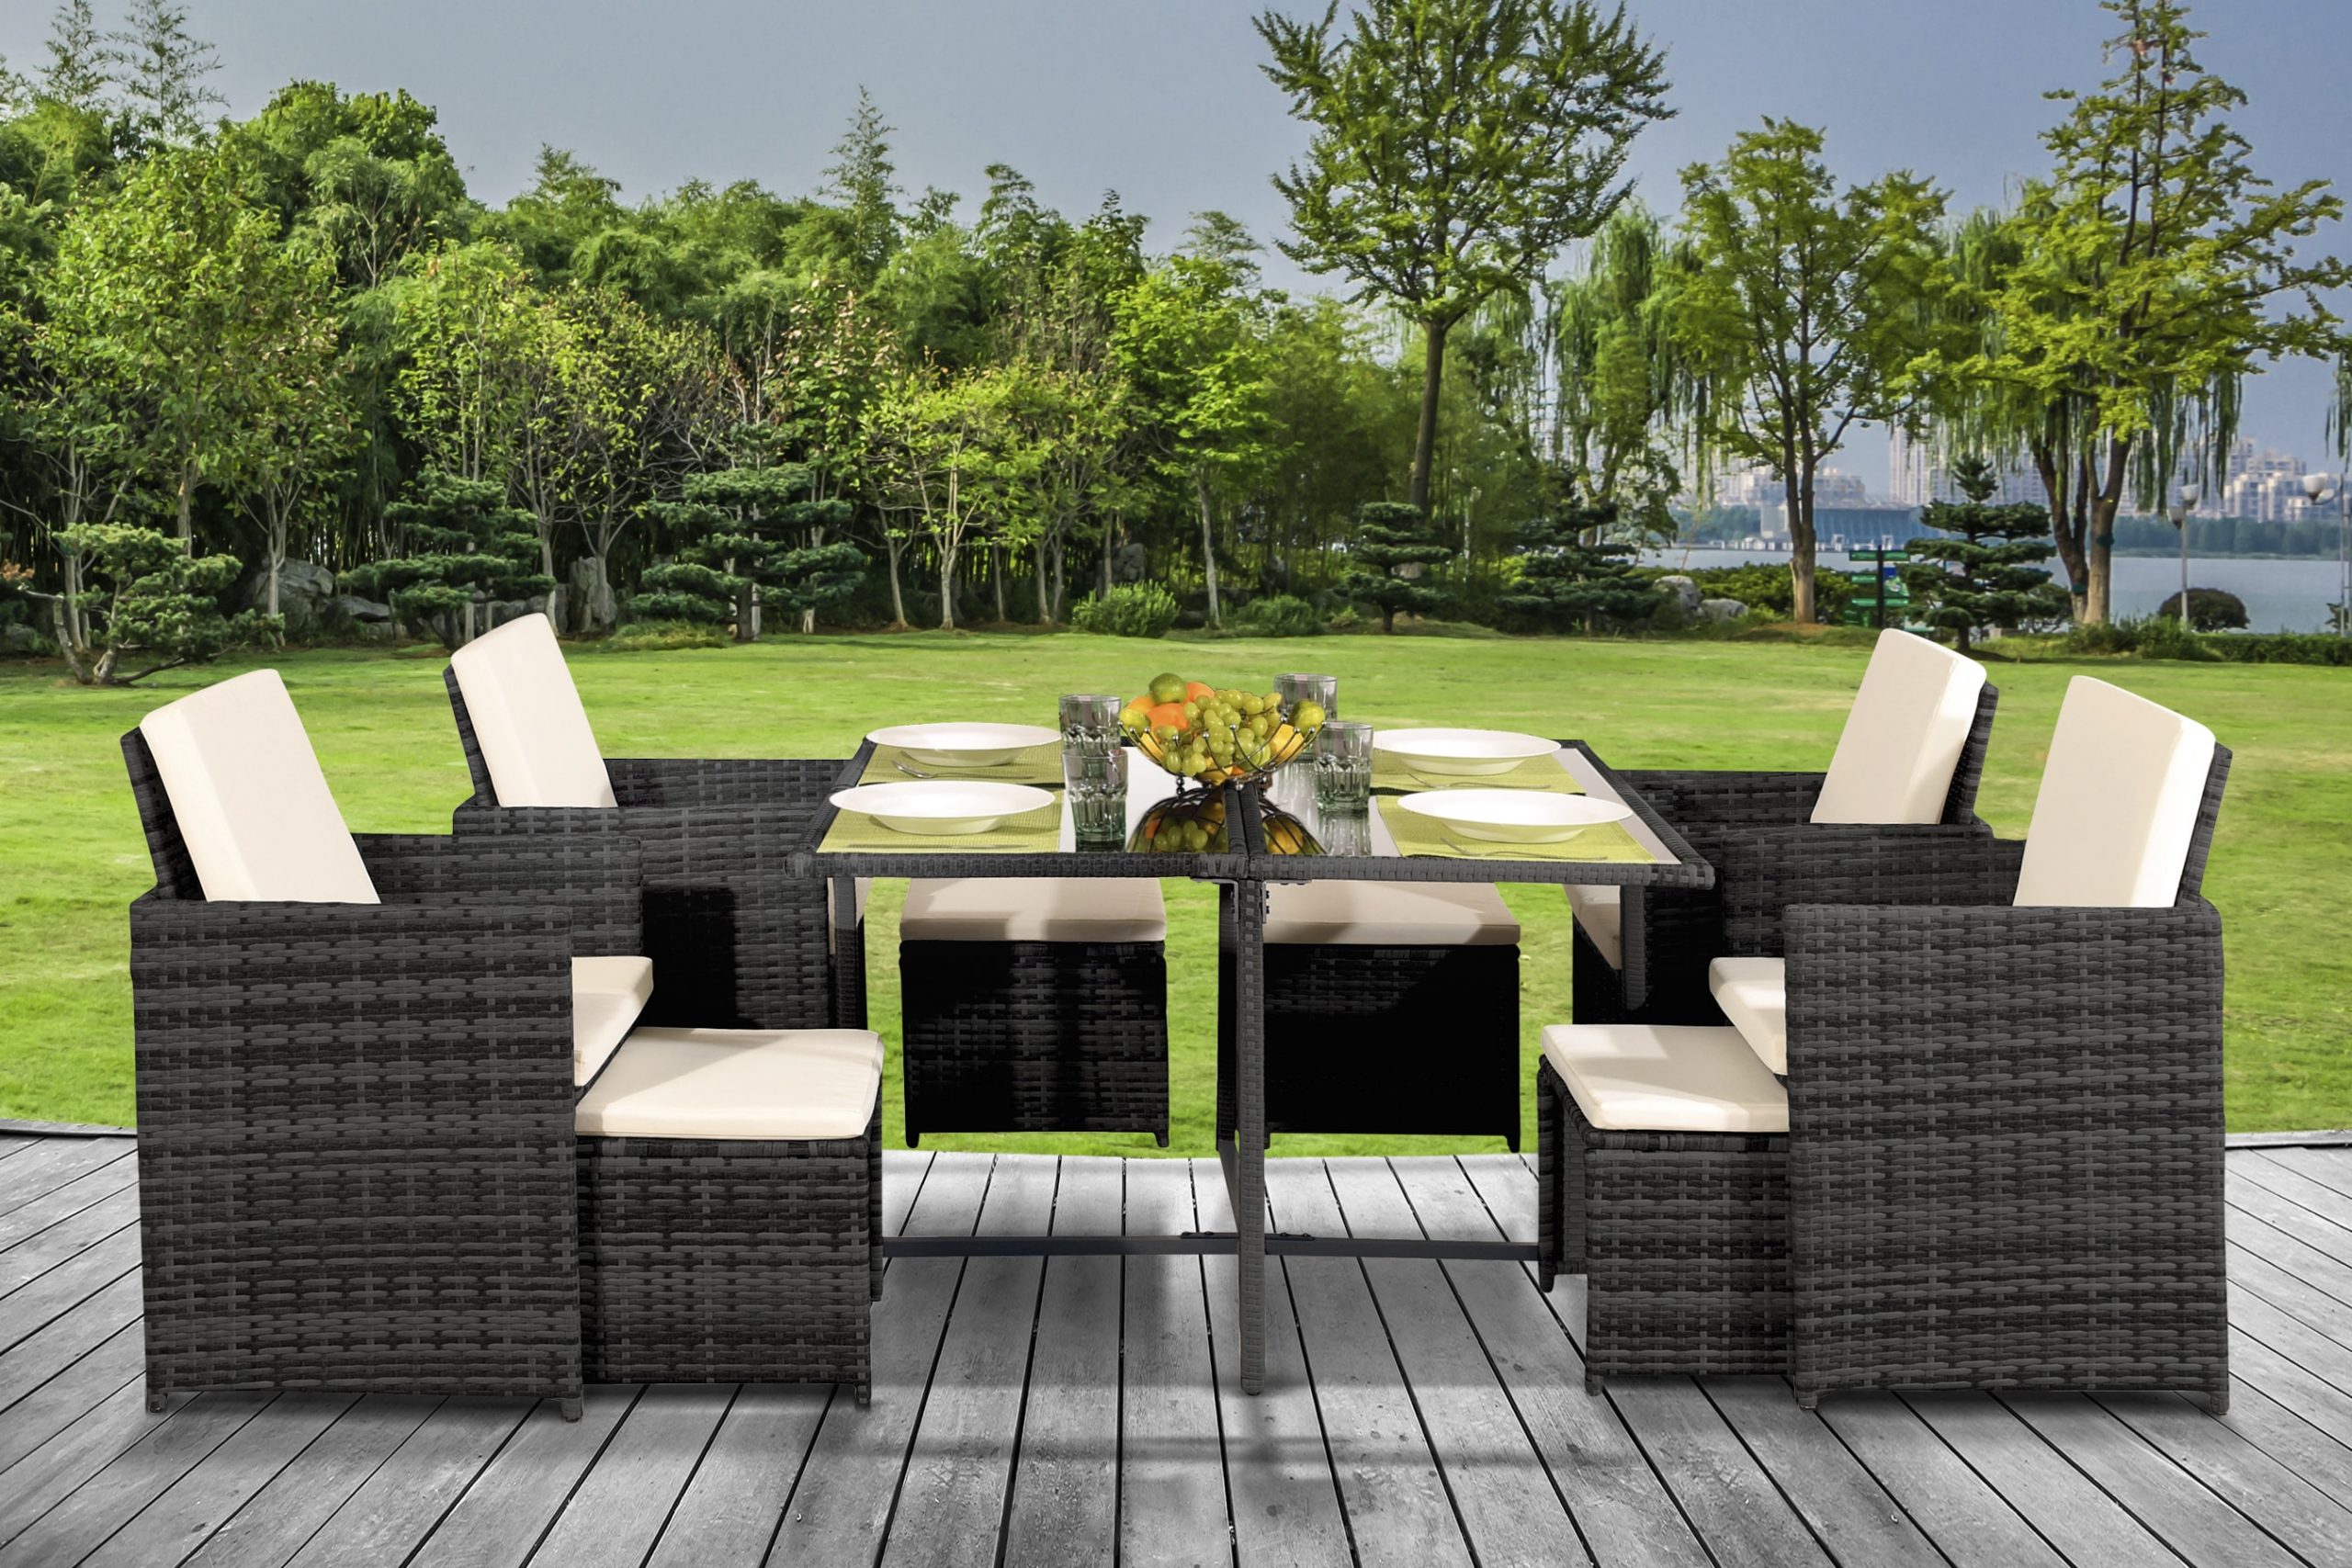 9 Piece Rattan Cube Dining Set with optional Cover | UK Furniture 4U